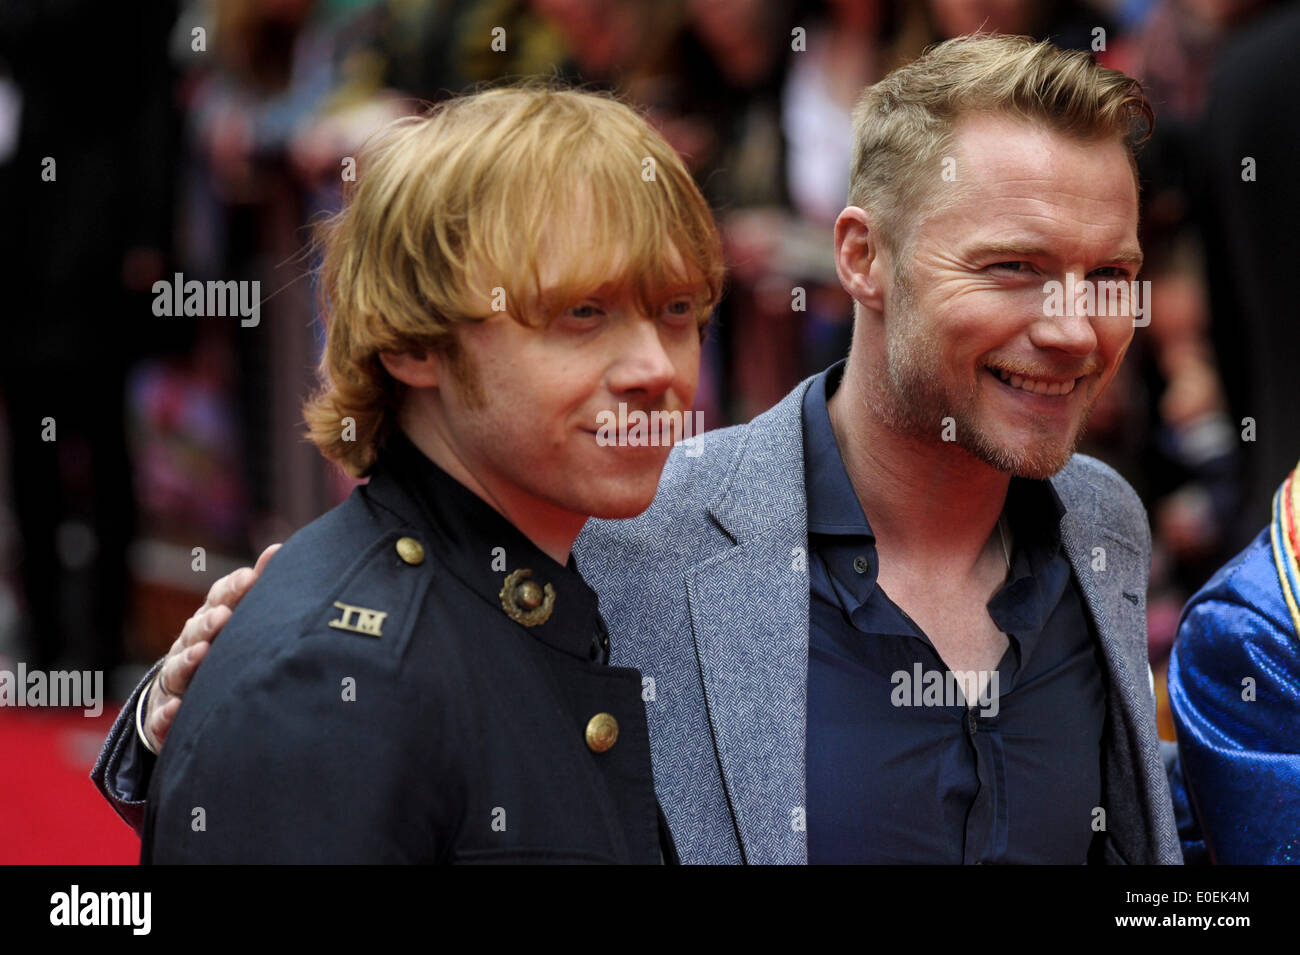 Postman Pat: The Movie - The World Premiere on 11/05/2014 at ODEON West End, London. Persons pictured: Rupert Grint, Ronan Keating. Picture by Julie Edwards Stock Photo